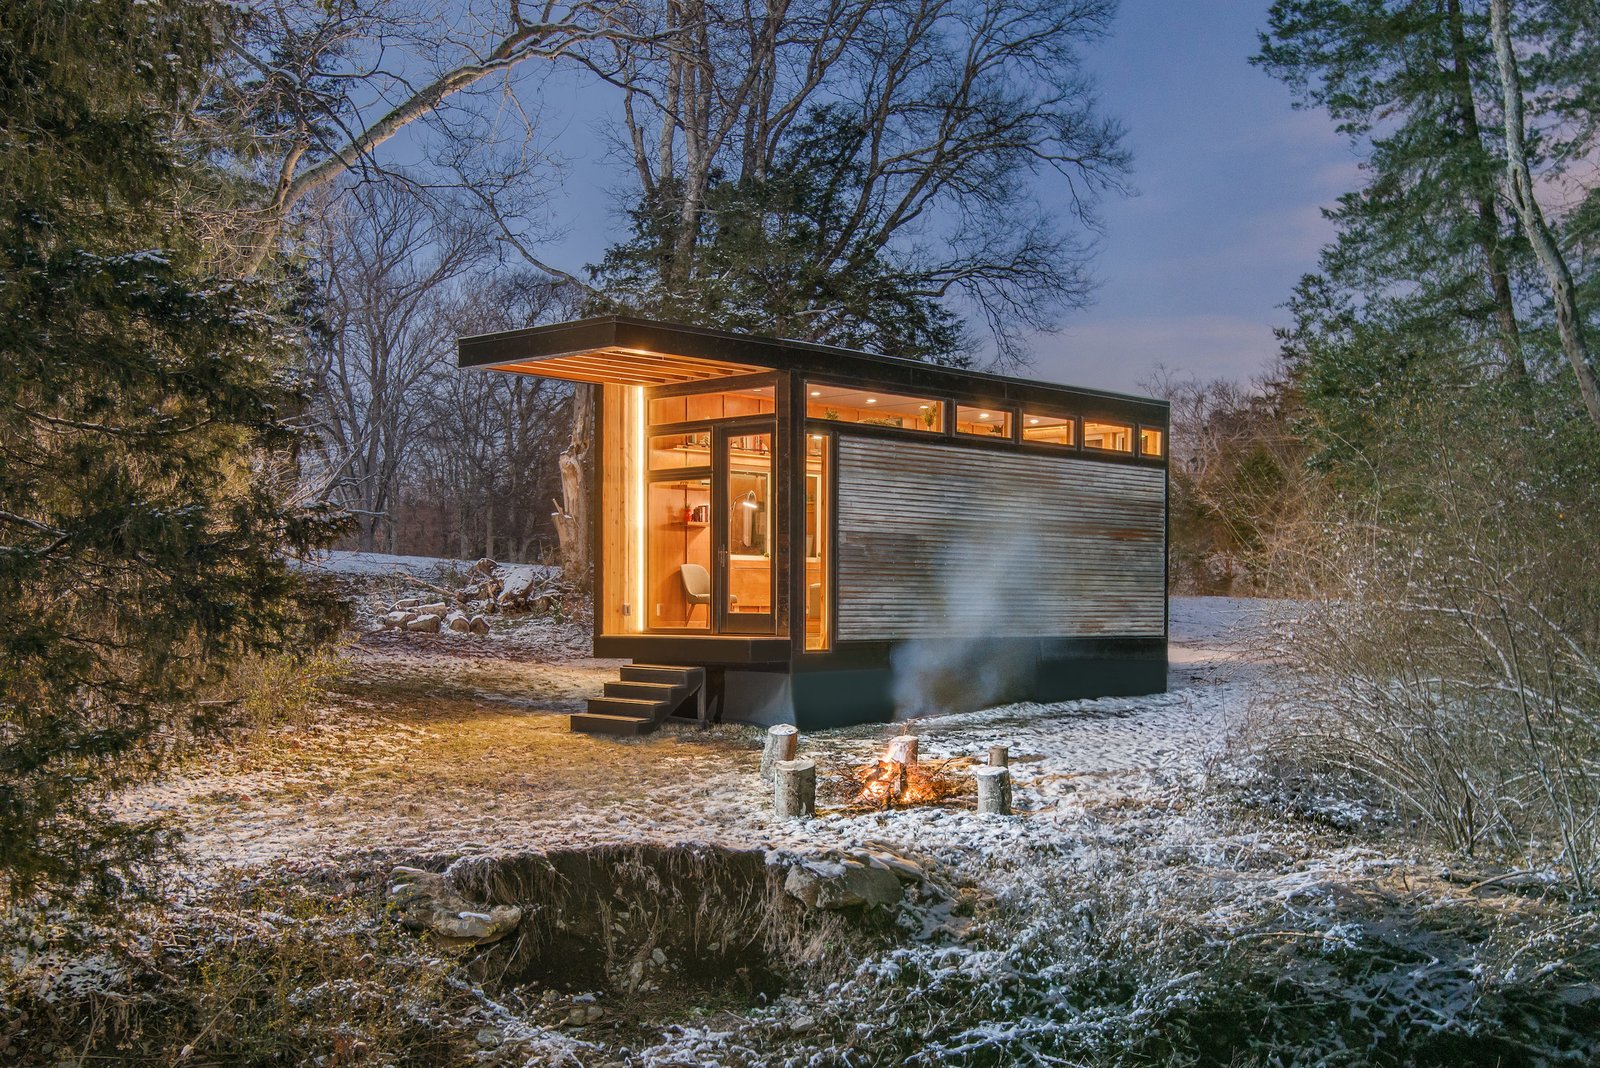 Affordable, adorable, and in many cases, transportable, these tiny homes made a big impact on our readers this year.